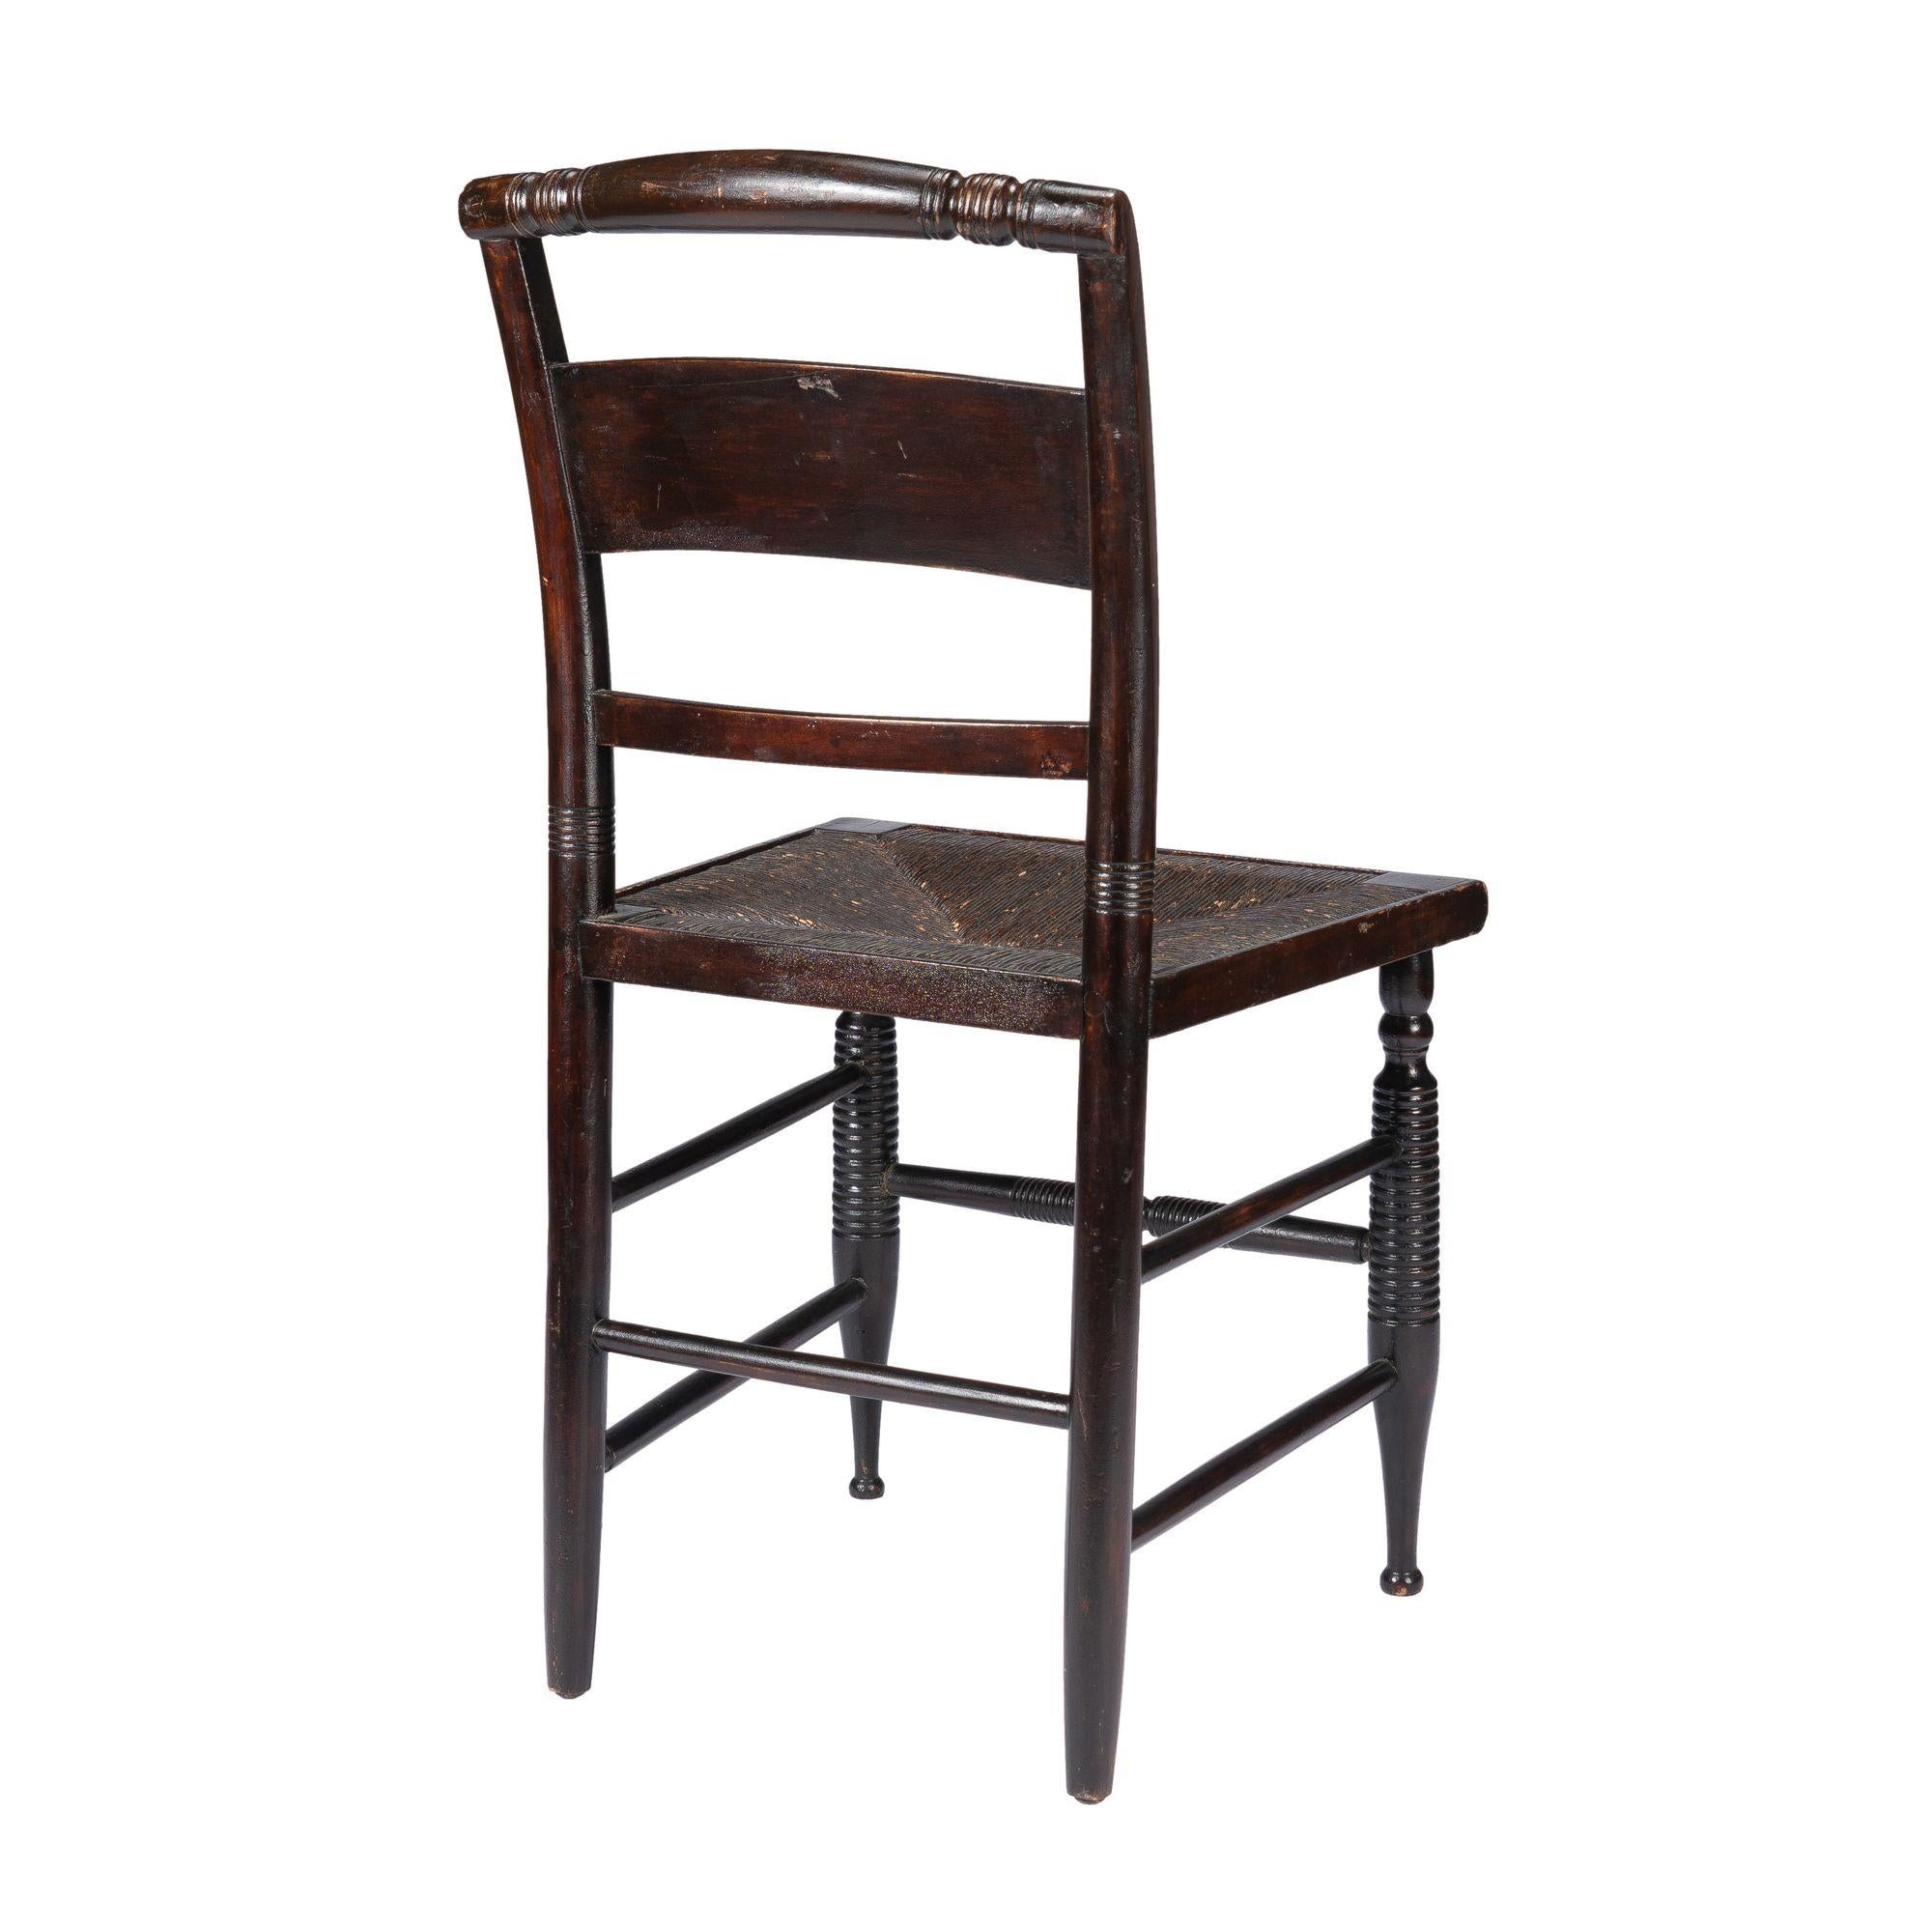 Rush Connecticut Valley Hitchcock rush seat side chair, 1820 For Sale